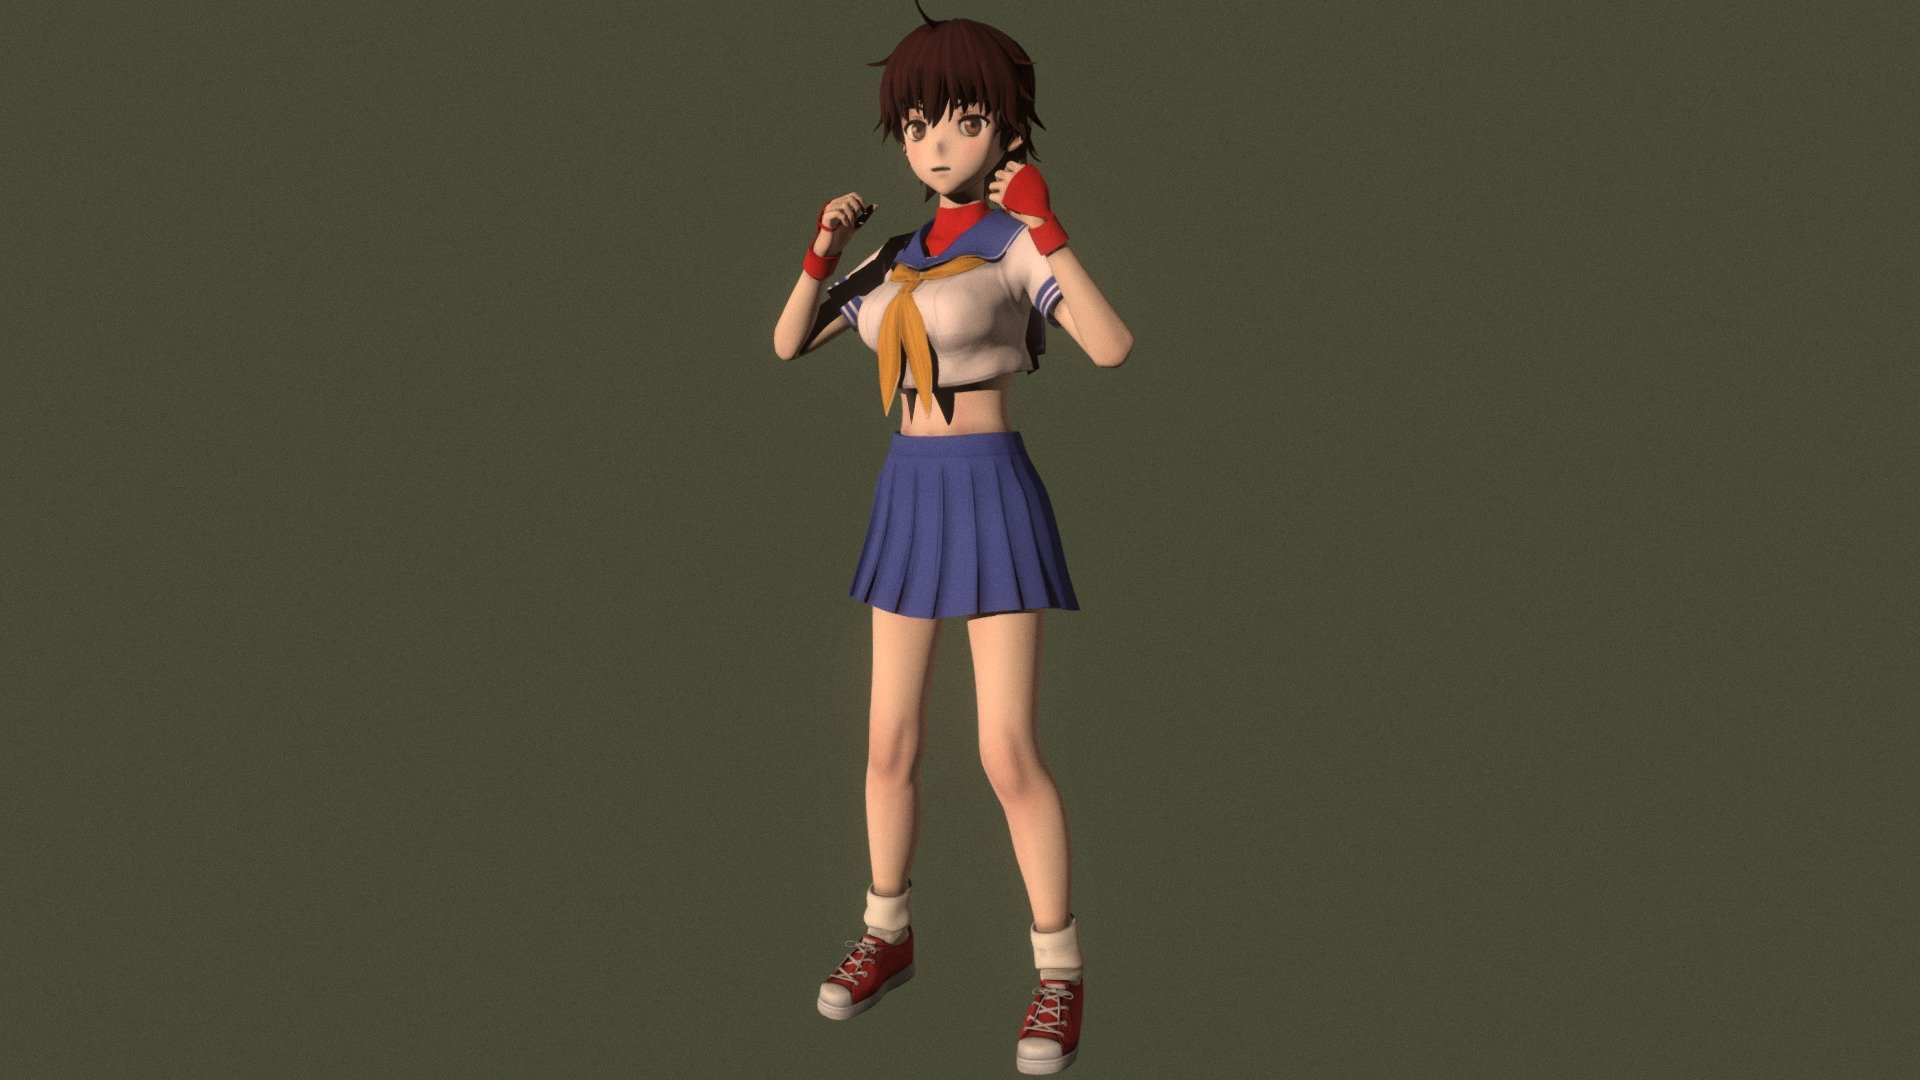 Posed model of anime girl Sakura Kasugano (Street Fighter).

This product include .FBX (ver. 7200) and .MAX (ver. 2010) files.

Rigged version: https://sketchfab.com/3d-models/t-pose-rigged-model-of-sakura-kasugano-f17aba418457472ba00a14311585a2ff

I support convert this 3D model to various file formats: 3DS; AI; ASE; DAE; DWF; DWG; DXF; FLT; HTR; IGS; M3G; MQO; OBJ; SAT; STL; W3D; WRL; X.

You can buy all of my models in one pack to save cost: https://sketchfab.com/3d-models/all-of-my-anime-girls-c5a56156994e4193b9e8fa21a3b8360b

And I can make commission models.

If you have any questions, please leave a comment or contact me via my email 3d.eden.project@gmail.com 3d model